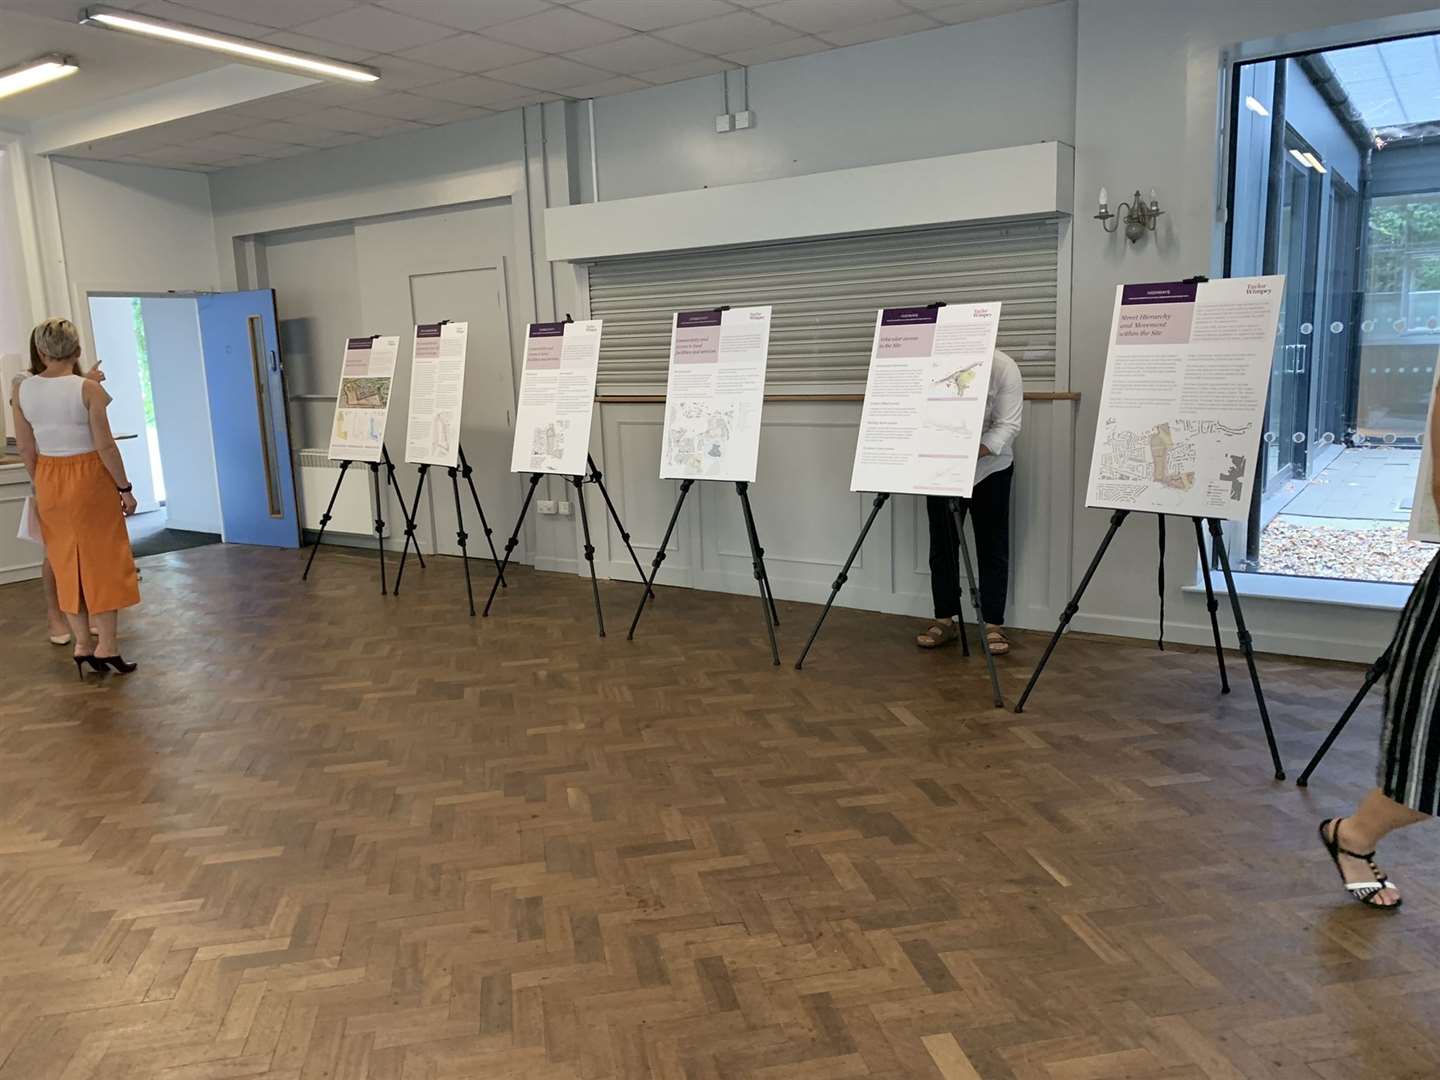 A public consultation for the homes was held on August 15